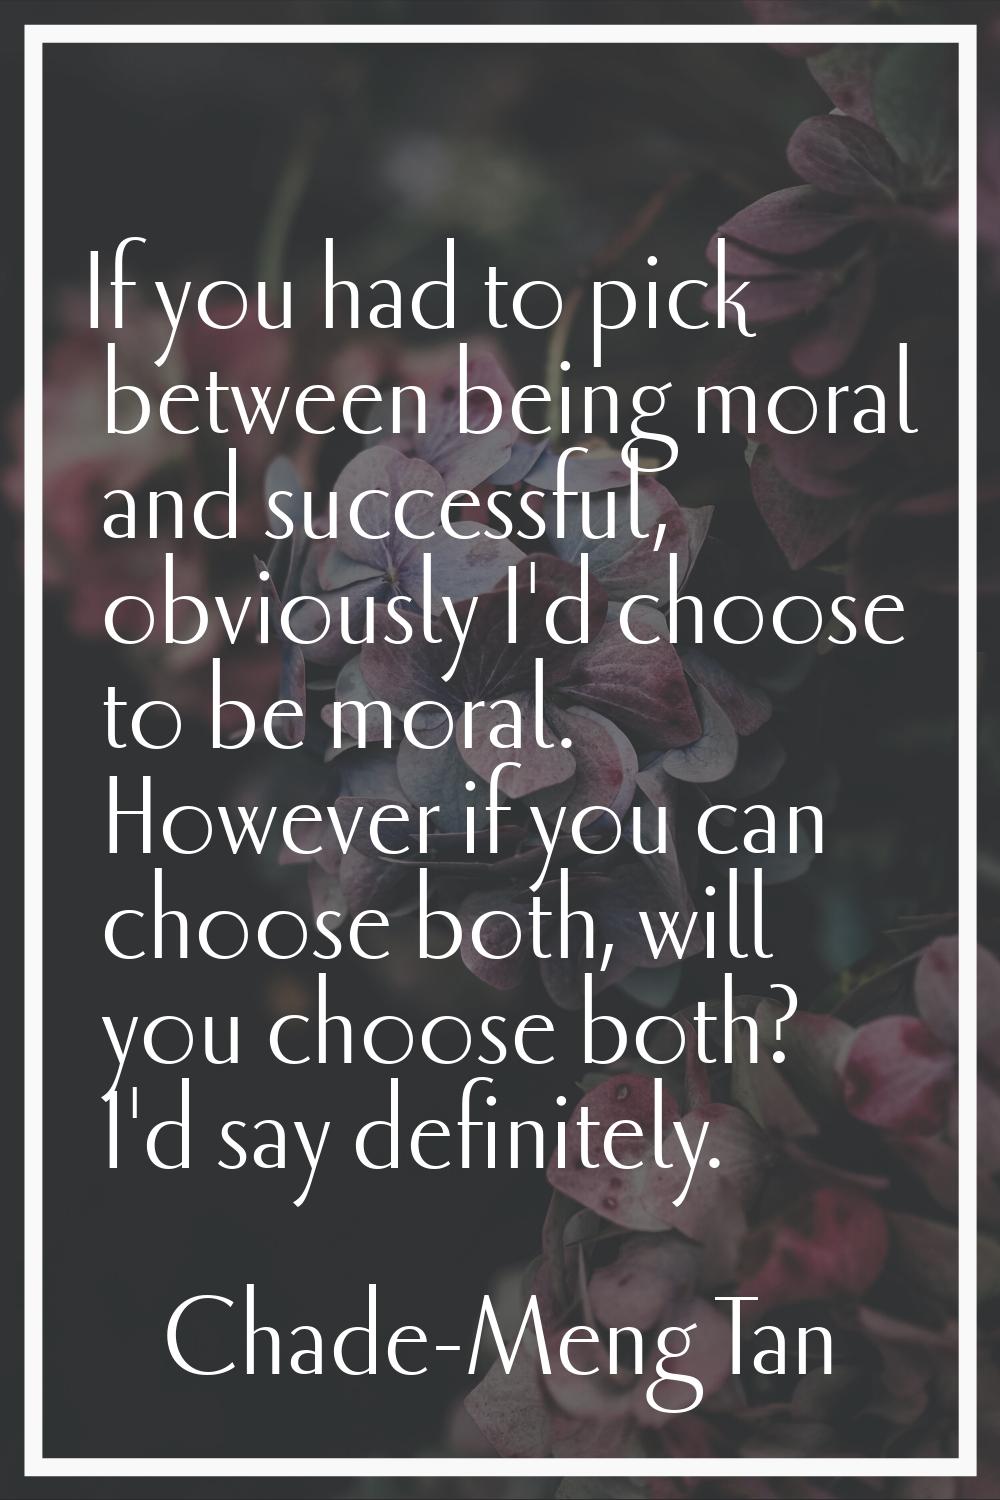 If you had to pick between being moral and successful, obviously I'd choose to be moral. However if